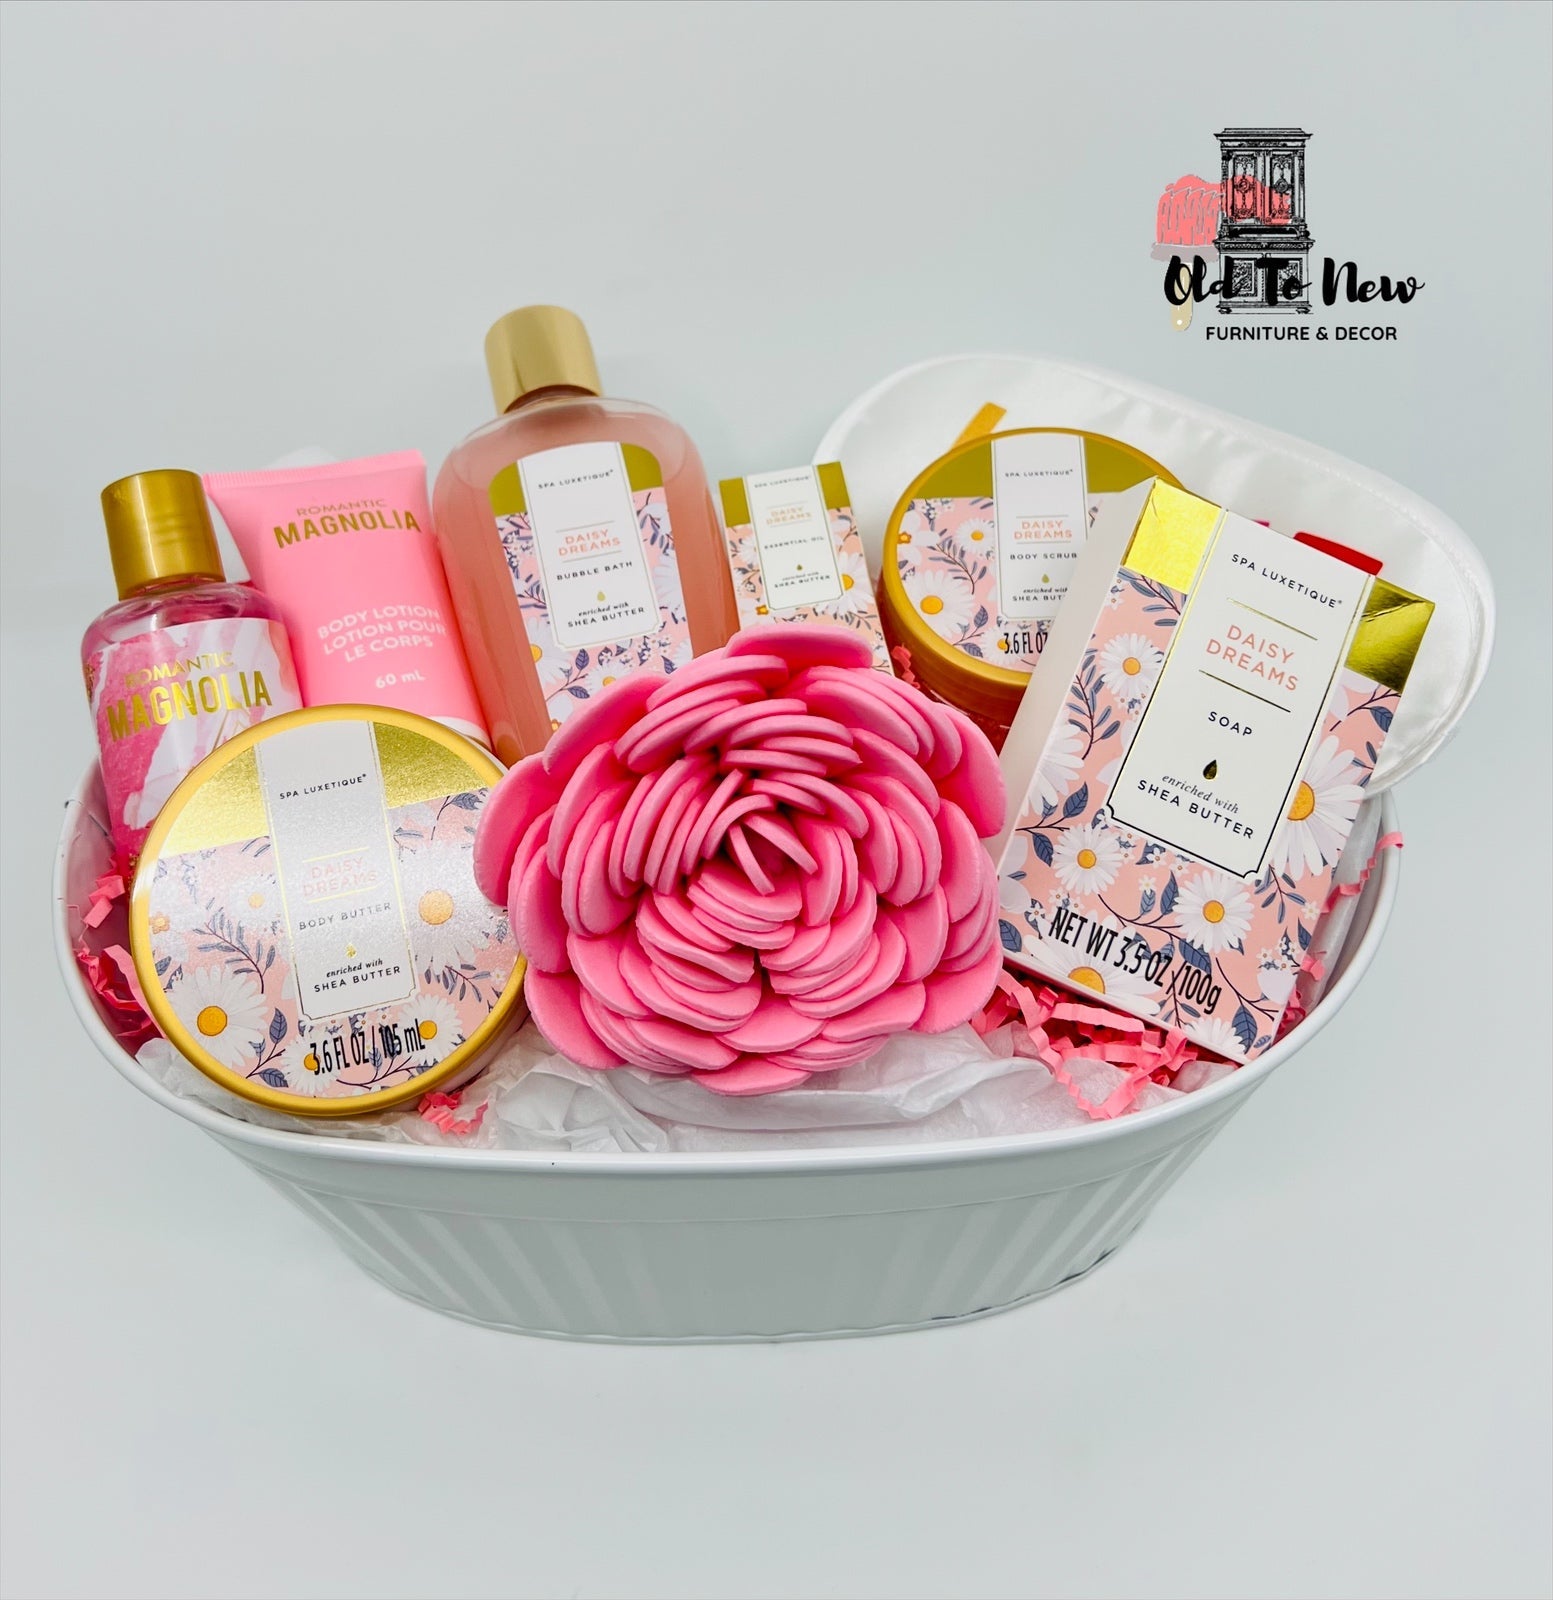 Daisy Dream & Magnolia Spa Gift Basket, Perfect for Birthday, Mothers – Old  to New Furniture